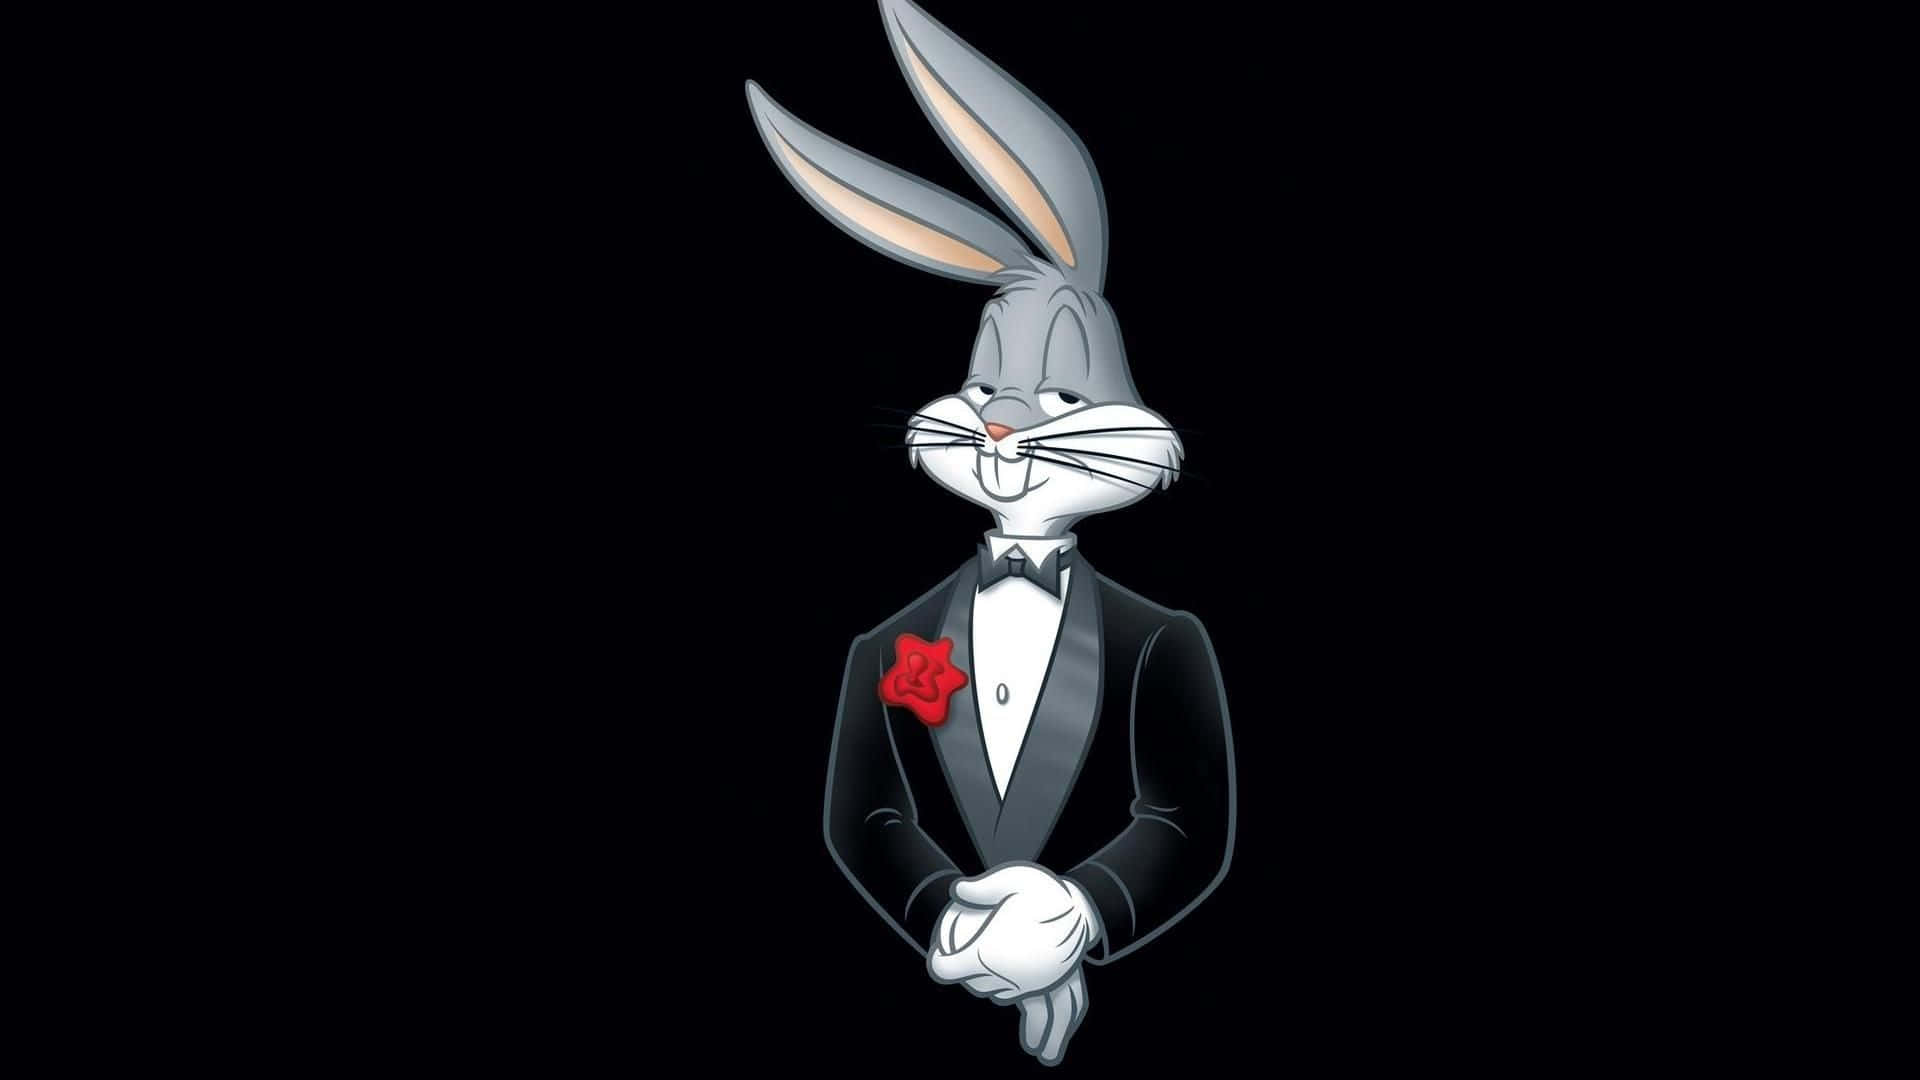 Download Bugs Bunny Supreme - A Classic Cartoon Character Reincarnated  Wallpaper